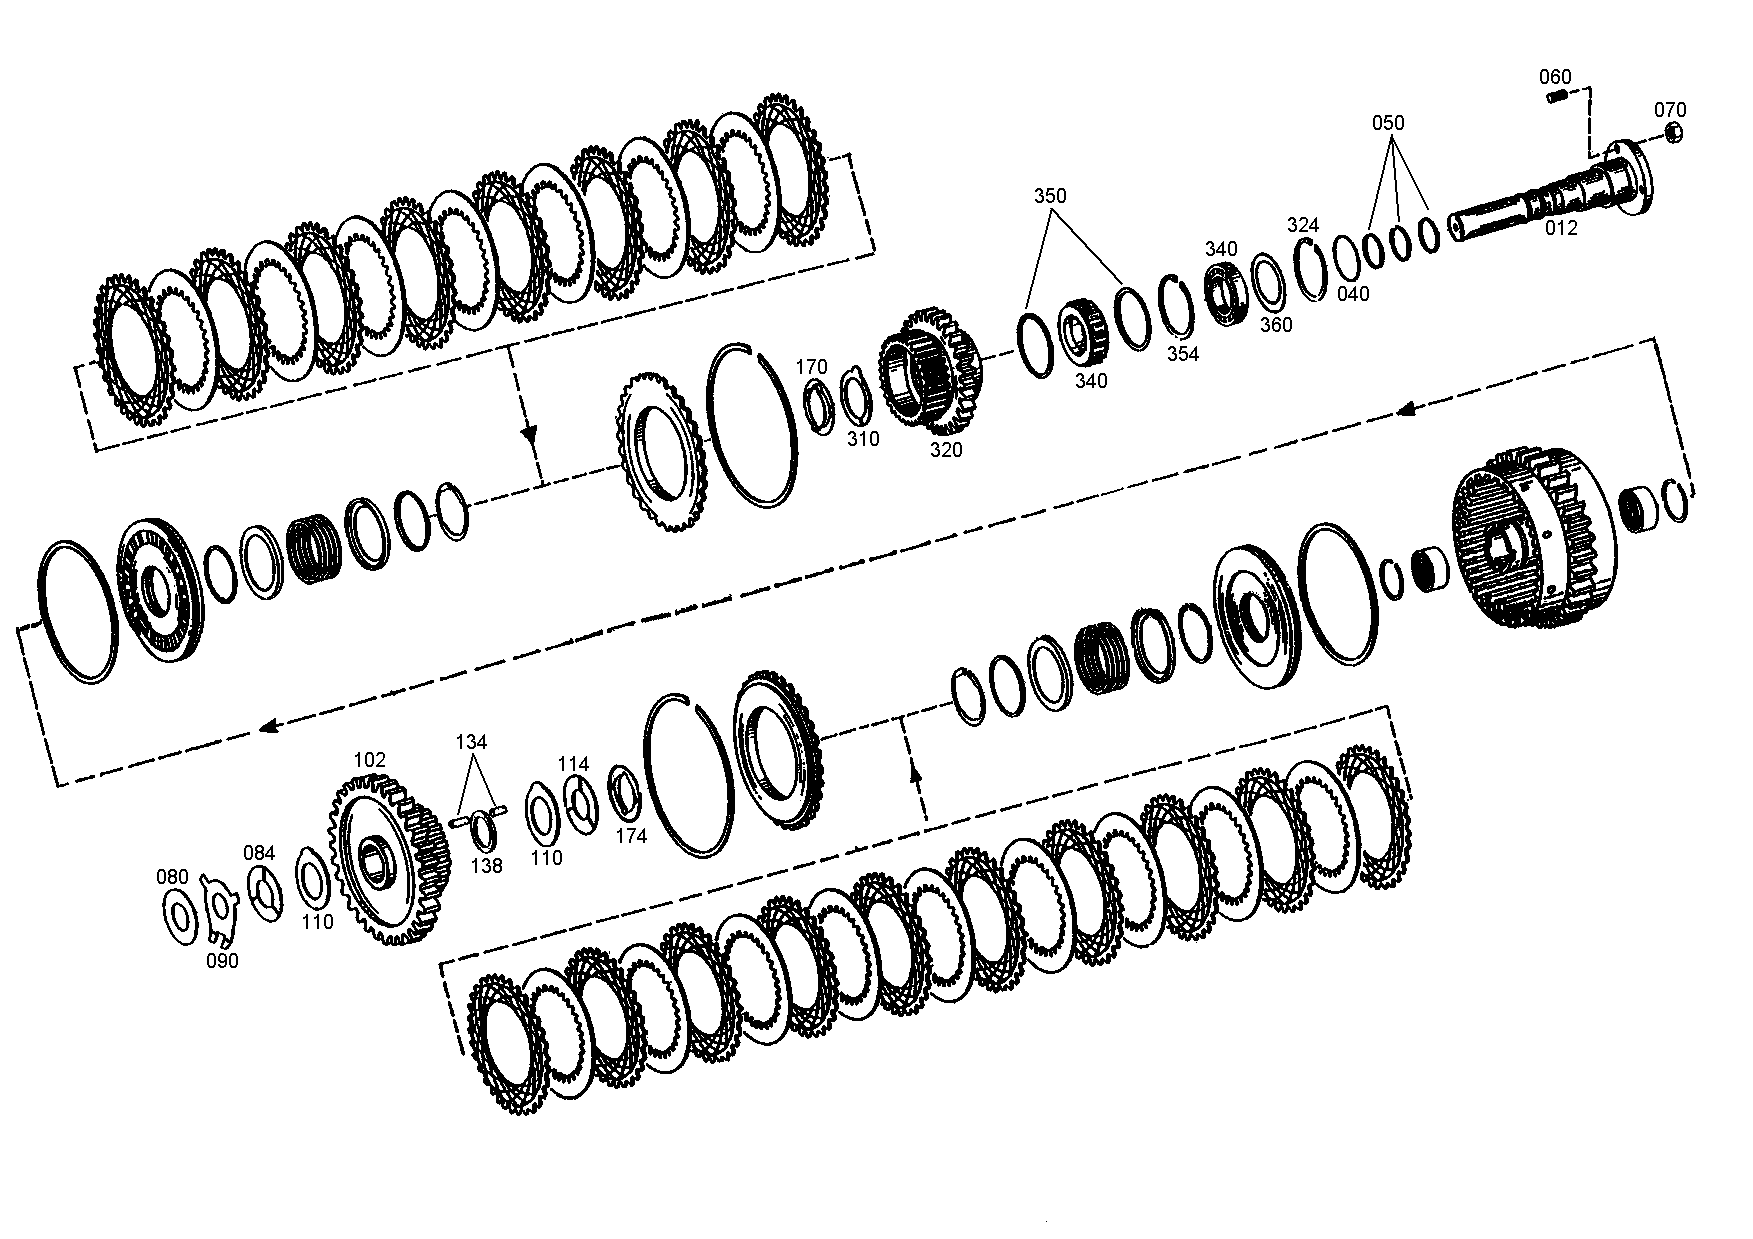 drawing for TEREX EQUIPMENT LIMITED 09398037 - ROLLER CAGE (figure 5)